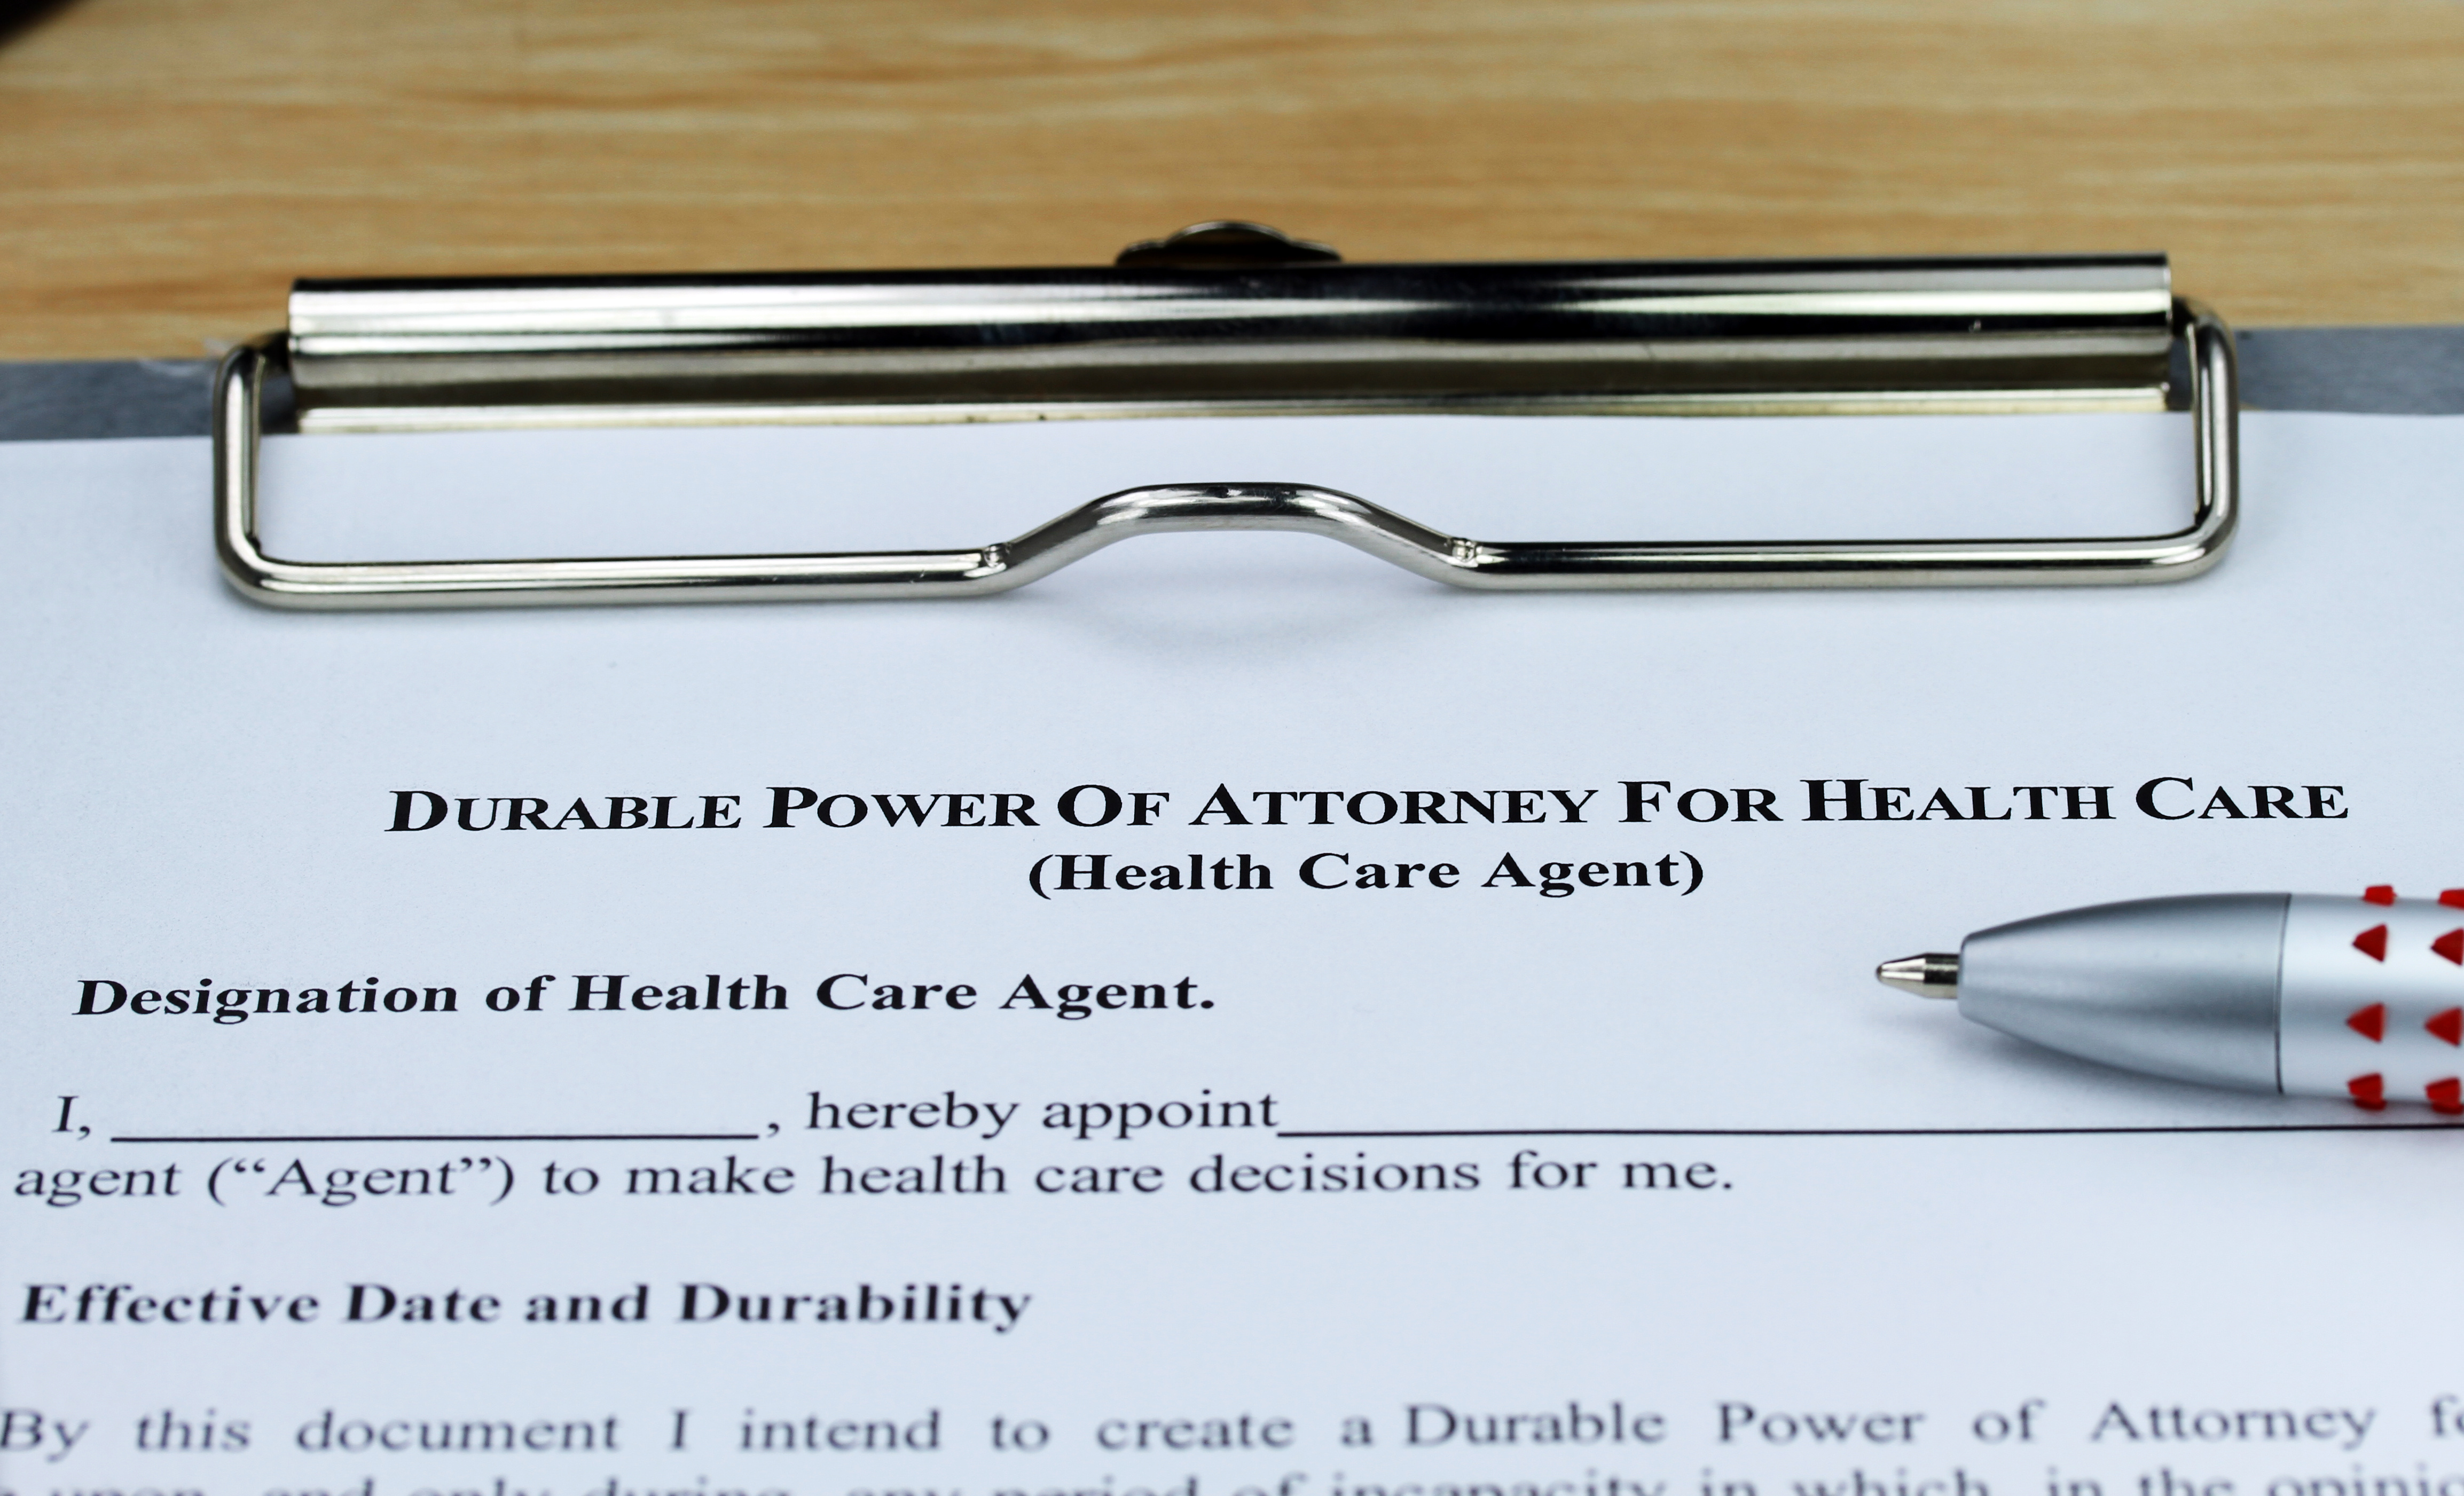 A Living Will or Health Care Power of Attorney? How about a Health Care Directive?